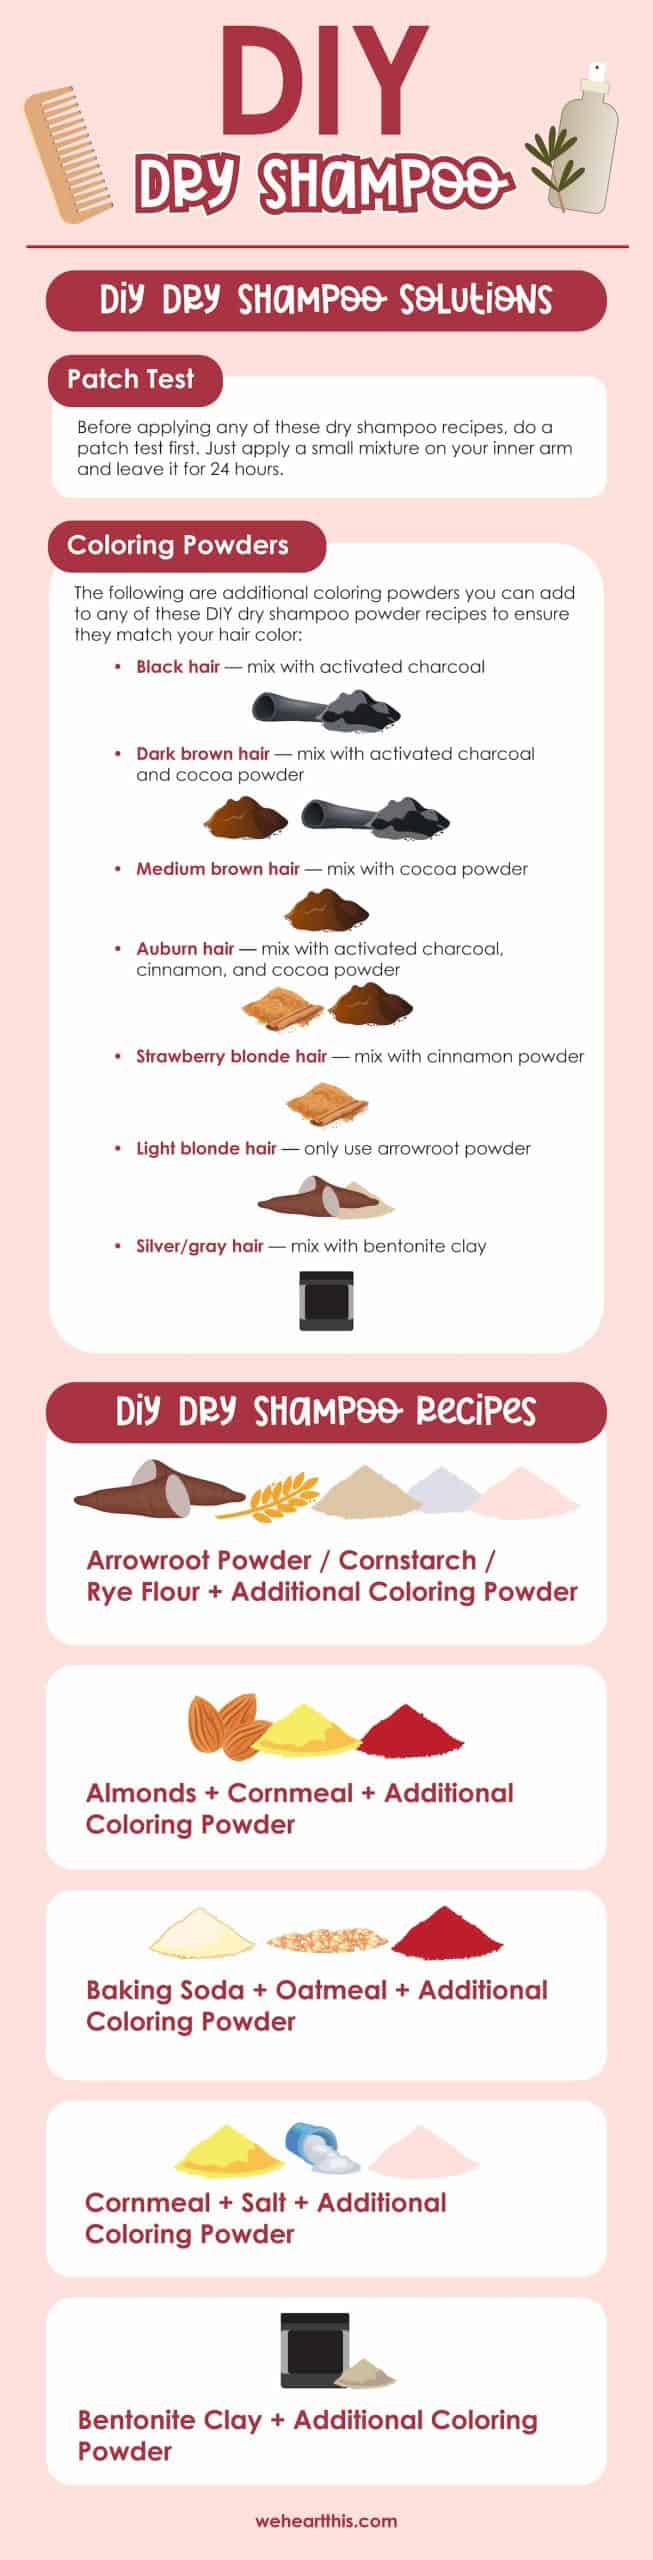 An infographic about diy dry shampoo solutions and shampoo recipes